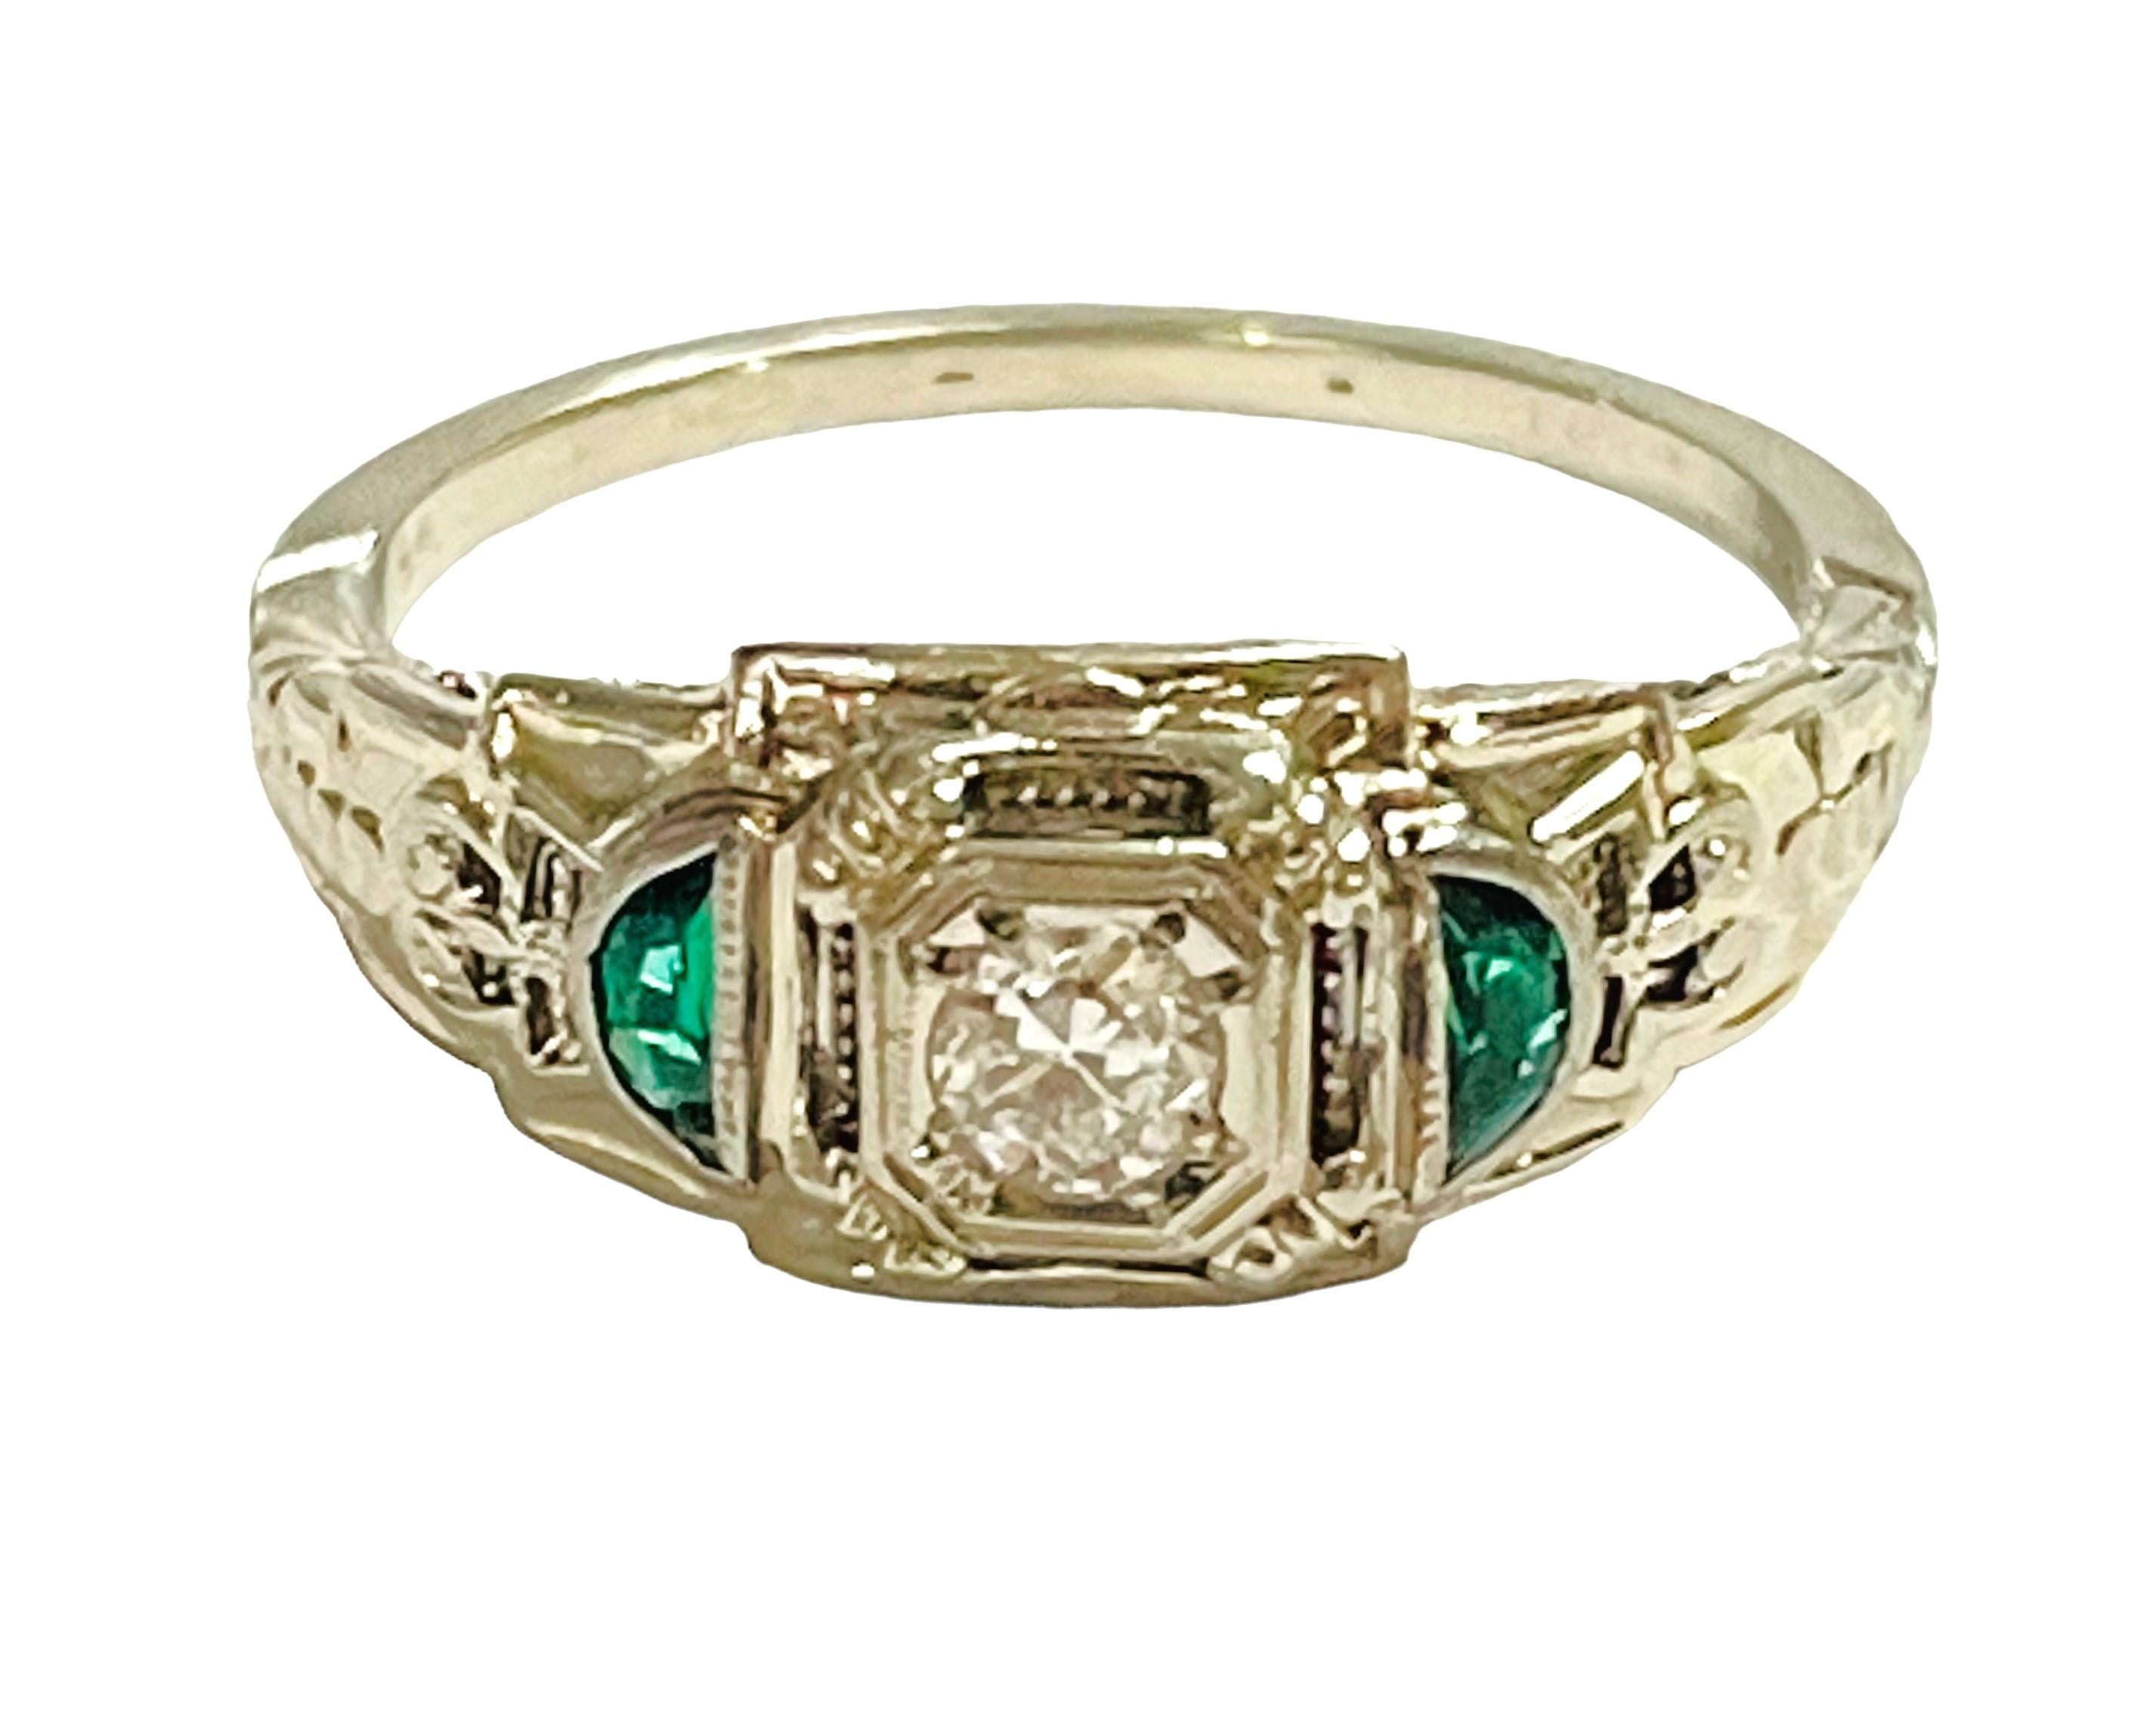 Art Deco Vintage 18K White Gold Diamond and Emerald Ring with Appraisal